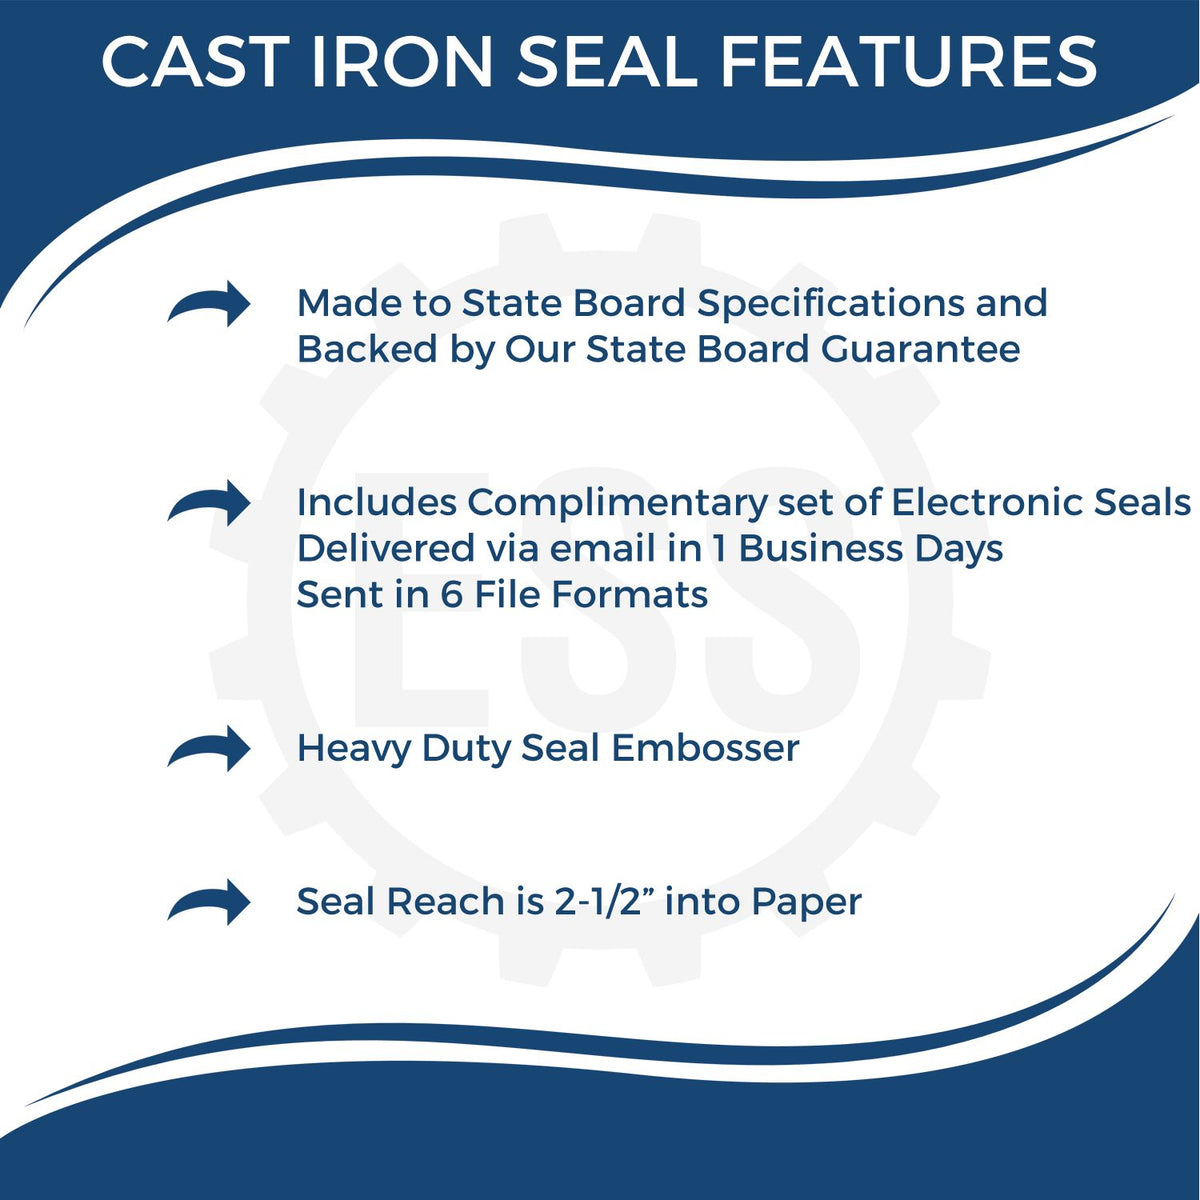 A picture of an infographic highlighting the selling points for the Heavy Duty Cast Iron New Hampshire Architect Embosser